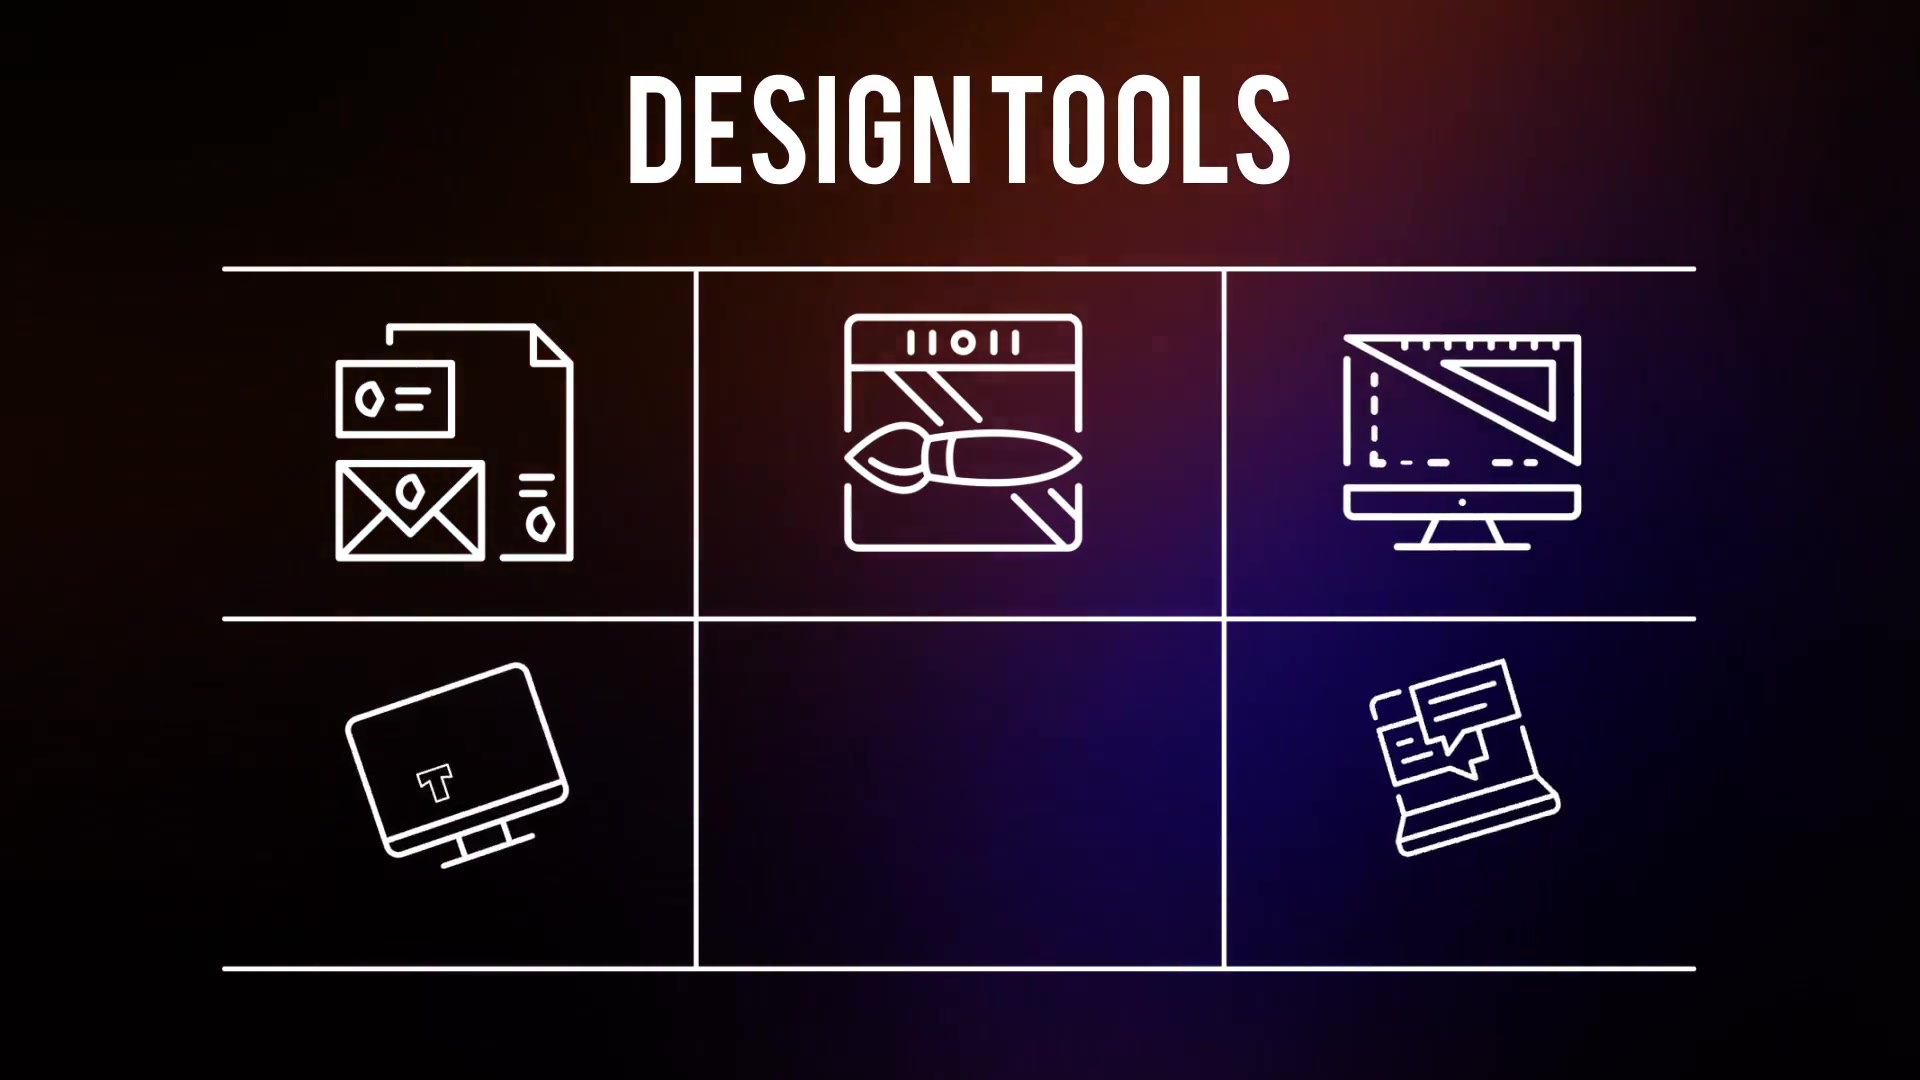 Design Tools 25 Outline Icons - Download Videohive 23185421